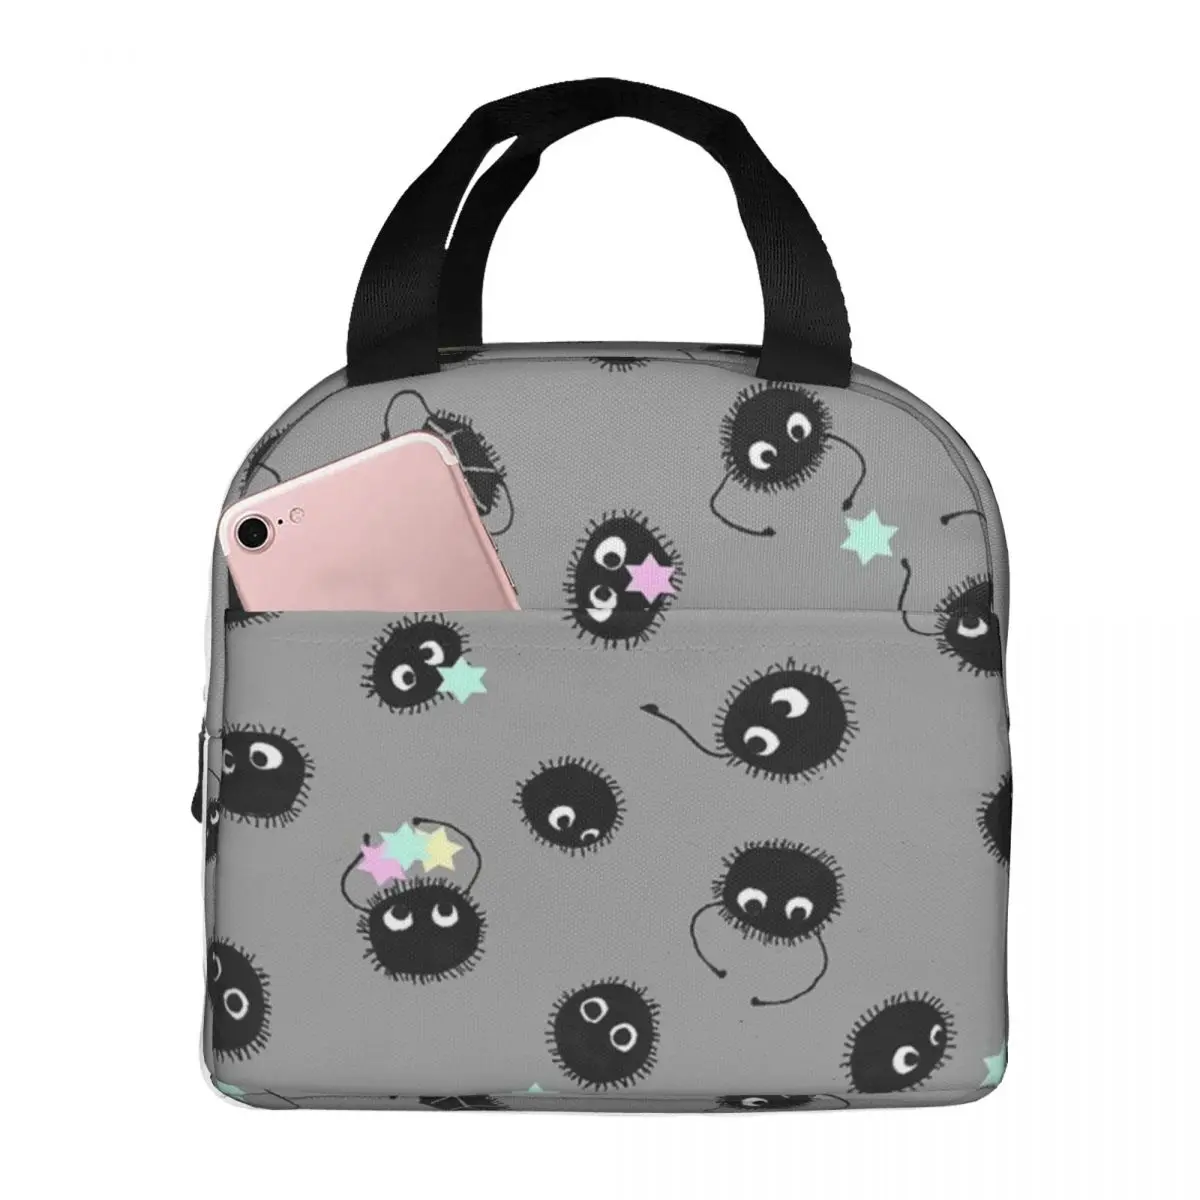 Lunch Bags for Women Kids Dust Mites Candy Soot Fuzz Ball Fuzzball Totoro Insulated Cooler Portable Picnic Lunch Box Bento Pouch